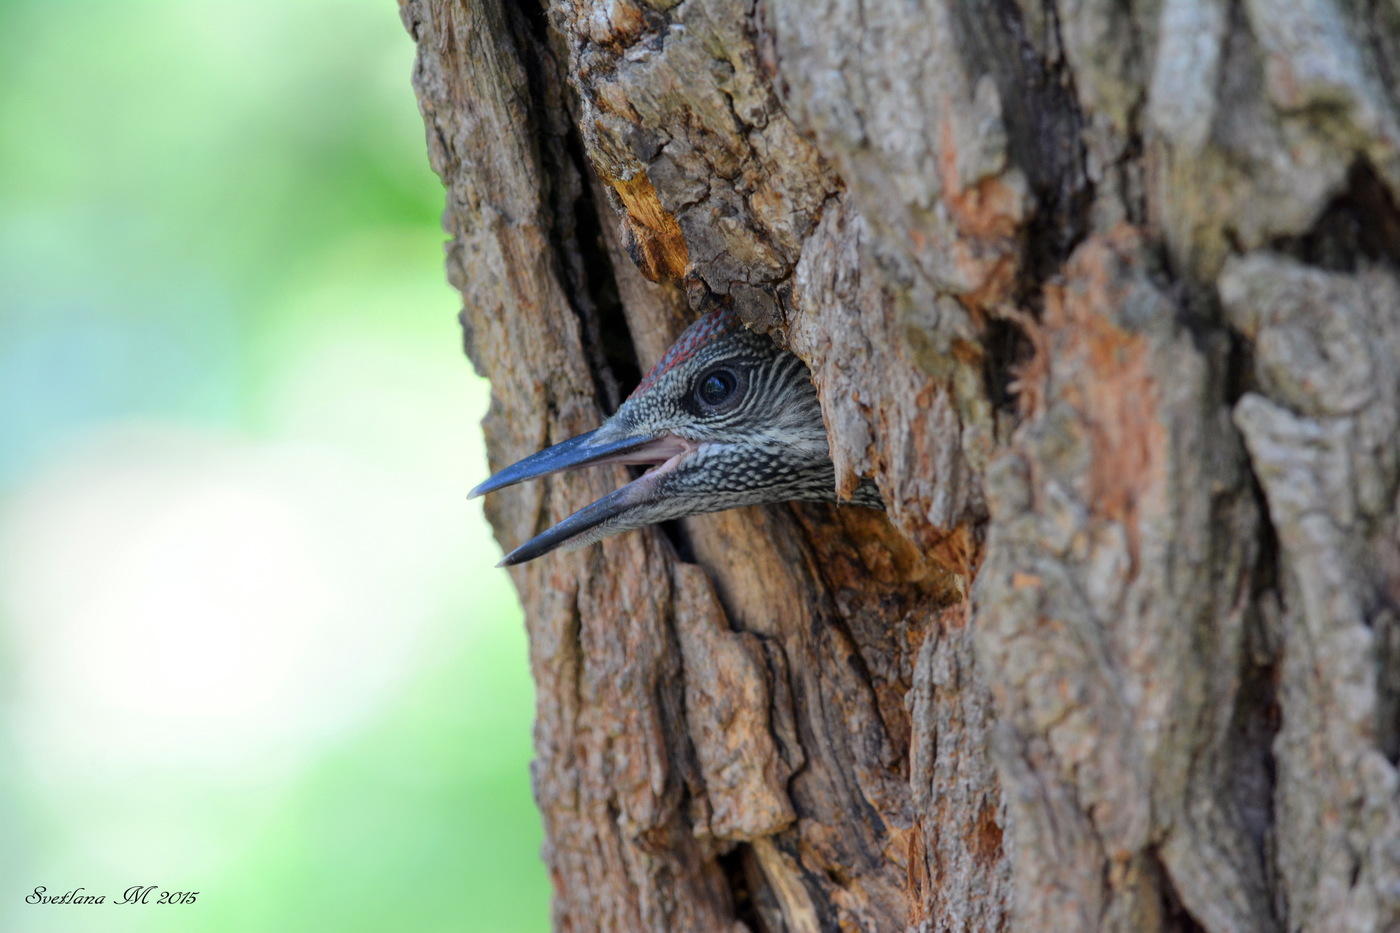 A green woodpecker chick in a hollow